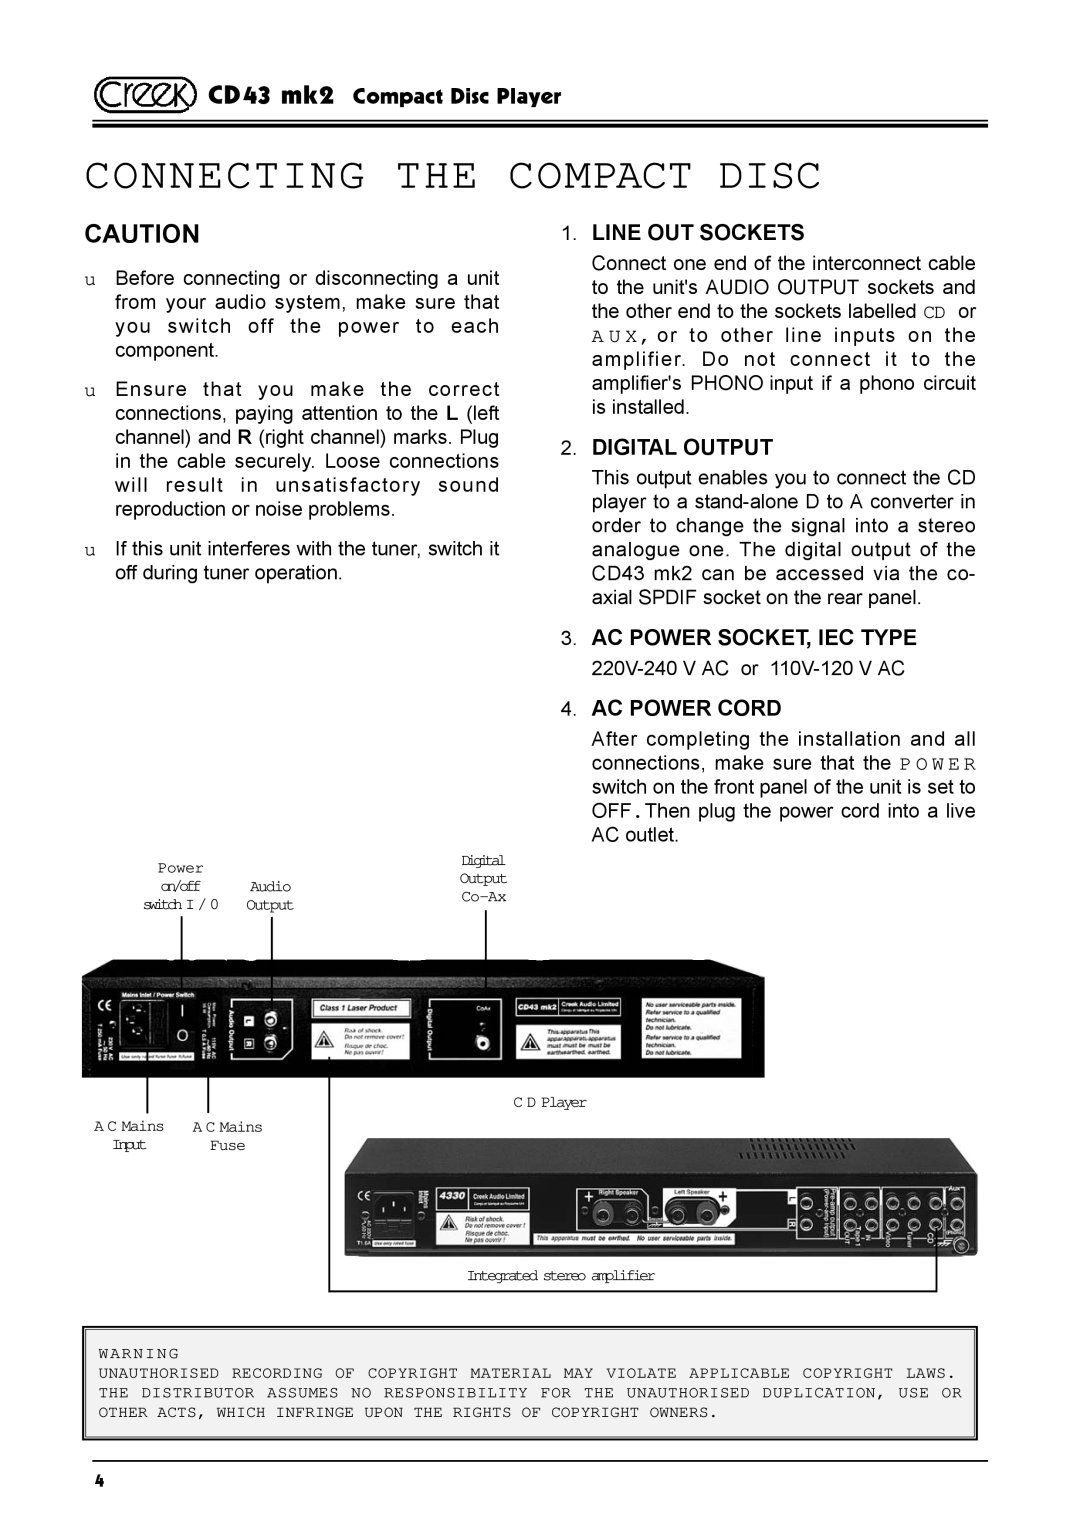 Creek Audio CD43 mk 2 manual Connecting The Compact Disc, Line Out Sockets, Digital Output, Ac Power Socket, Iec Type 